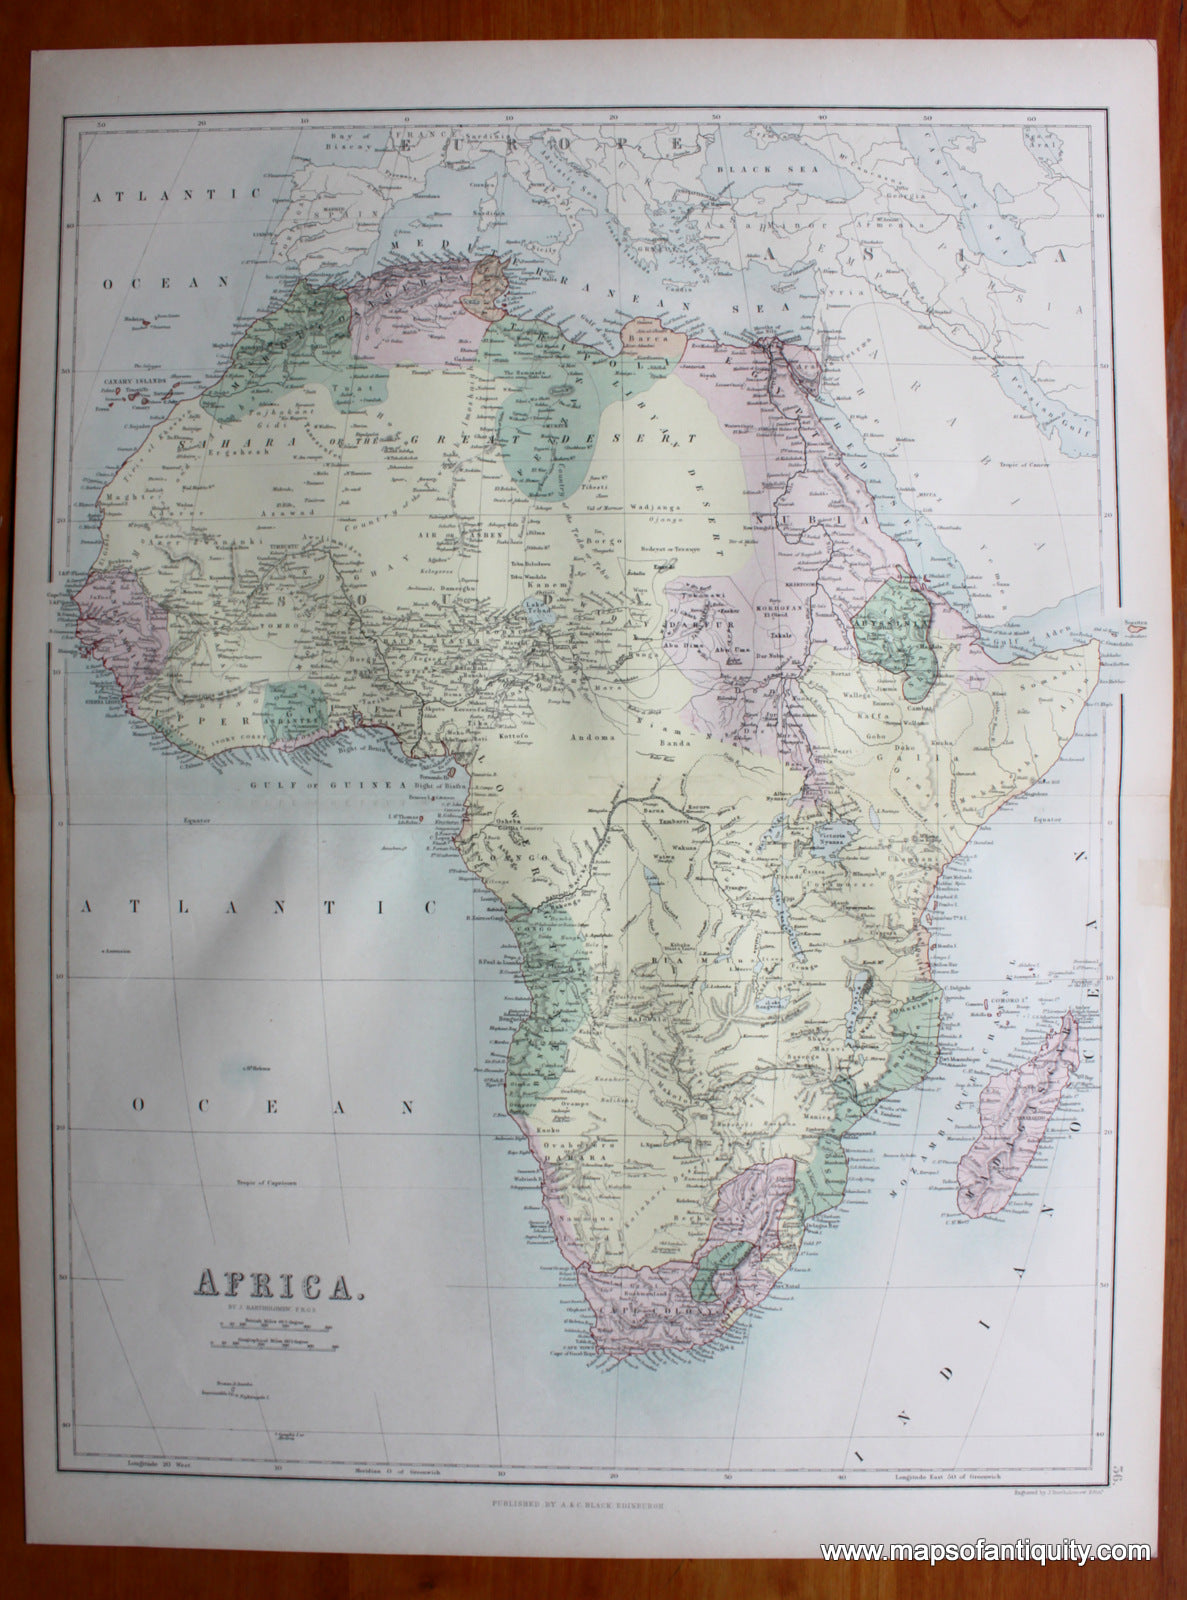 Antique-Printed-Color-Map-Africa-Africa-Africa-General-1879-Bartholomew/Black-Maps-Of-Antiquity